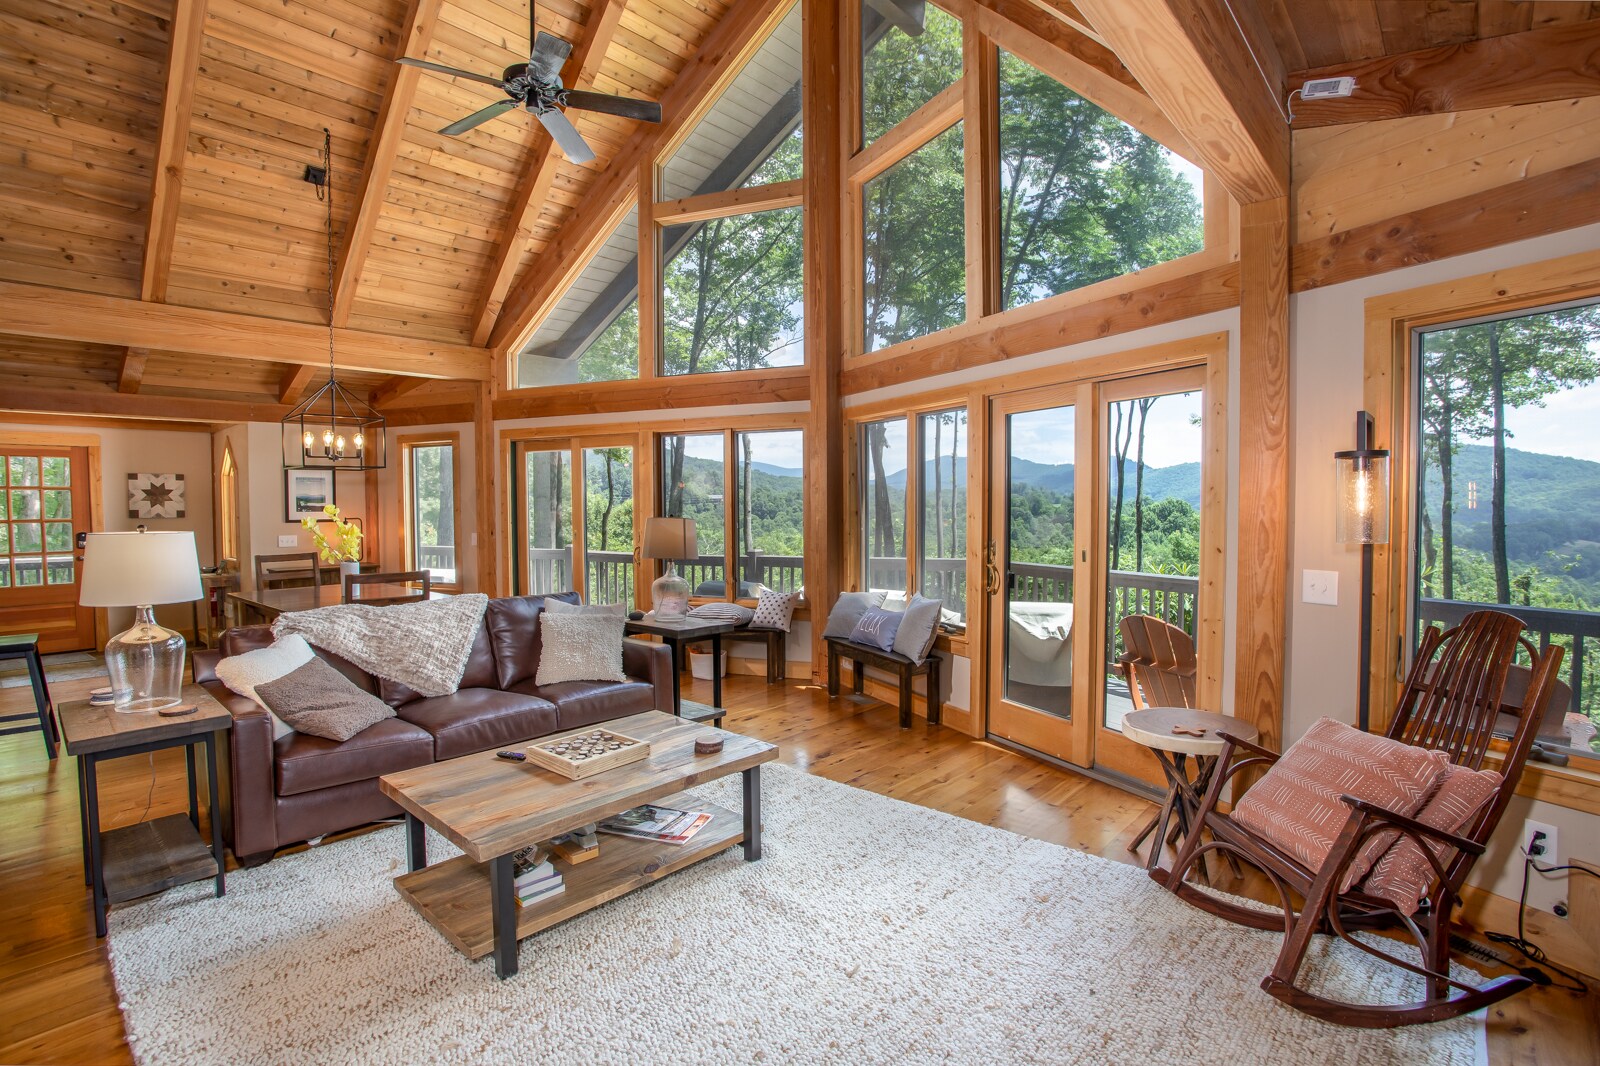 Huge Great Room with Soaring Vaulted Tongue-in-Groove Ceilings, Exposed Beams, and Wood Floors